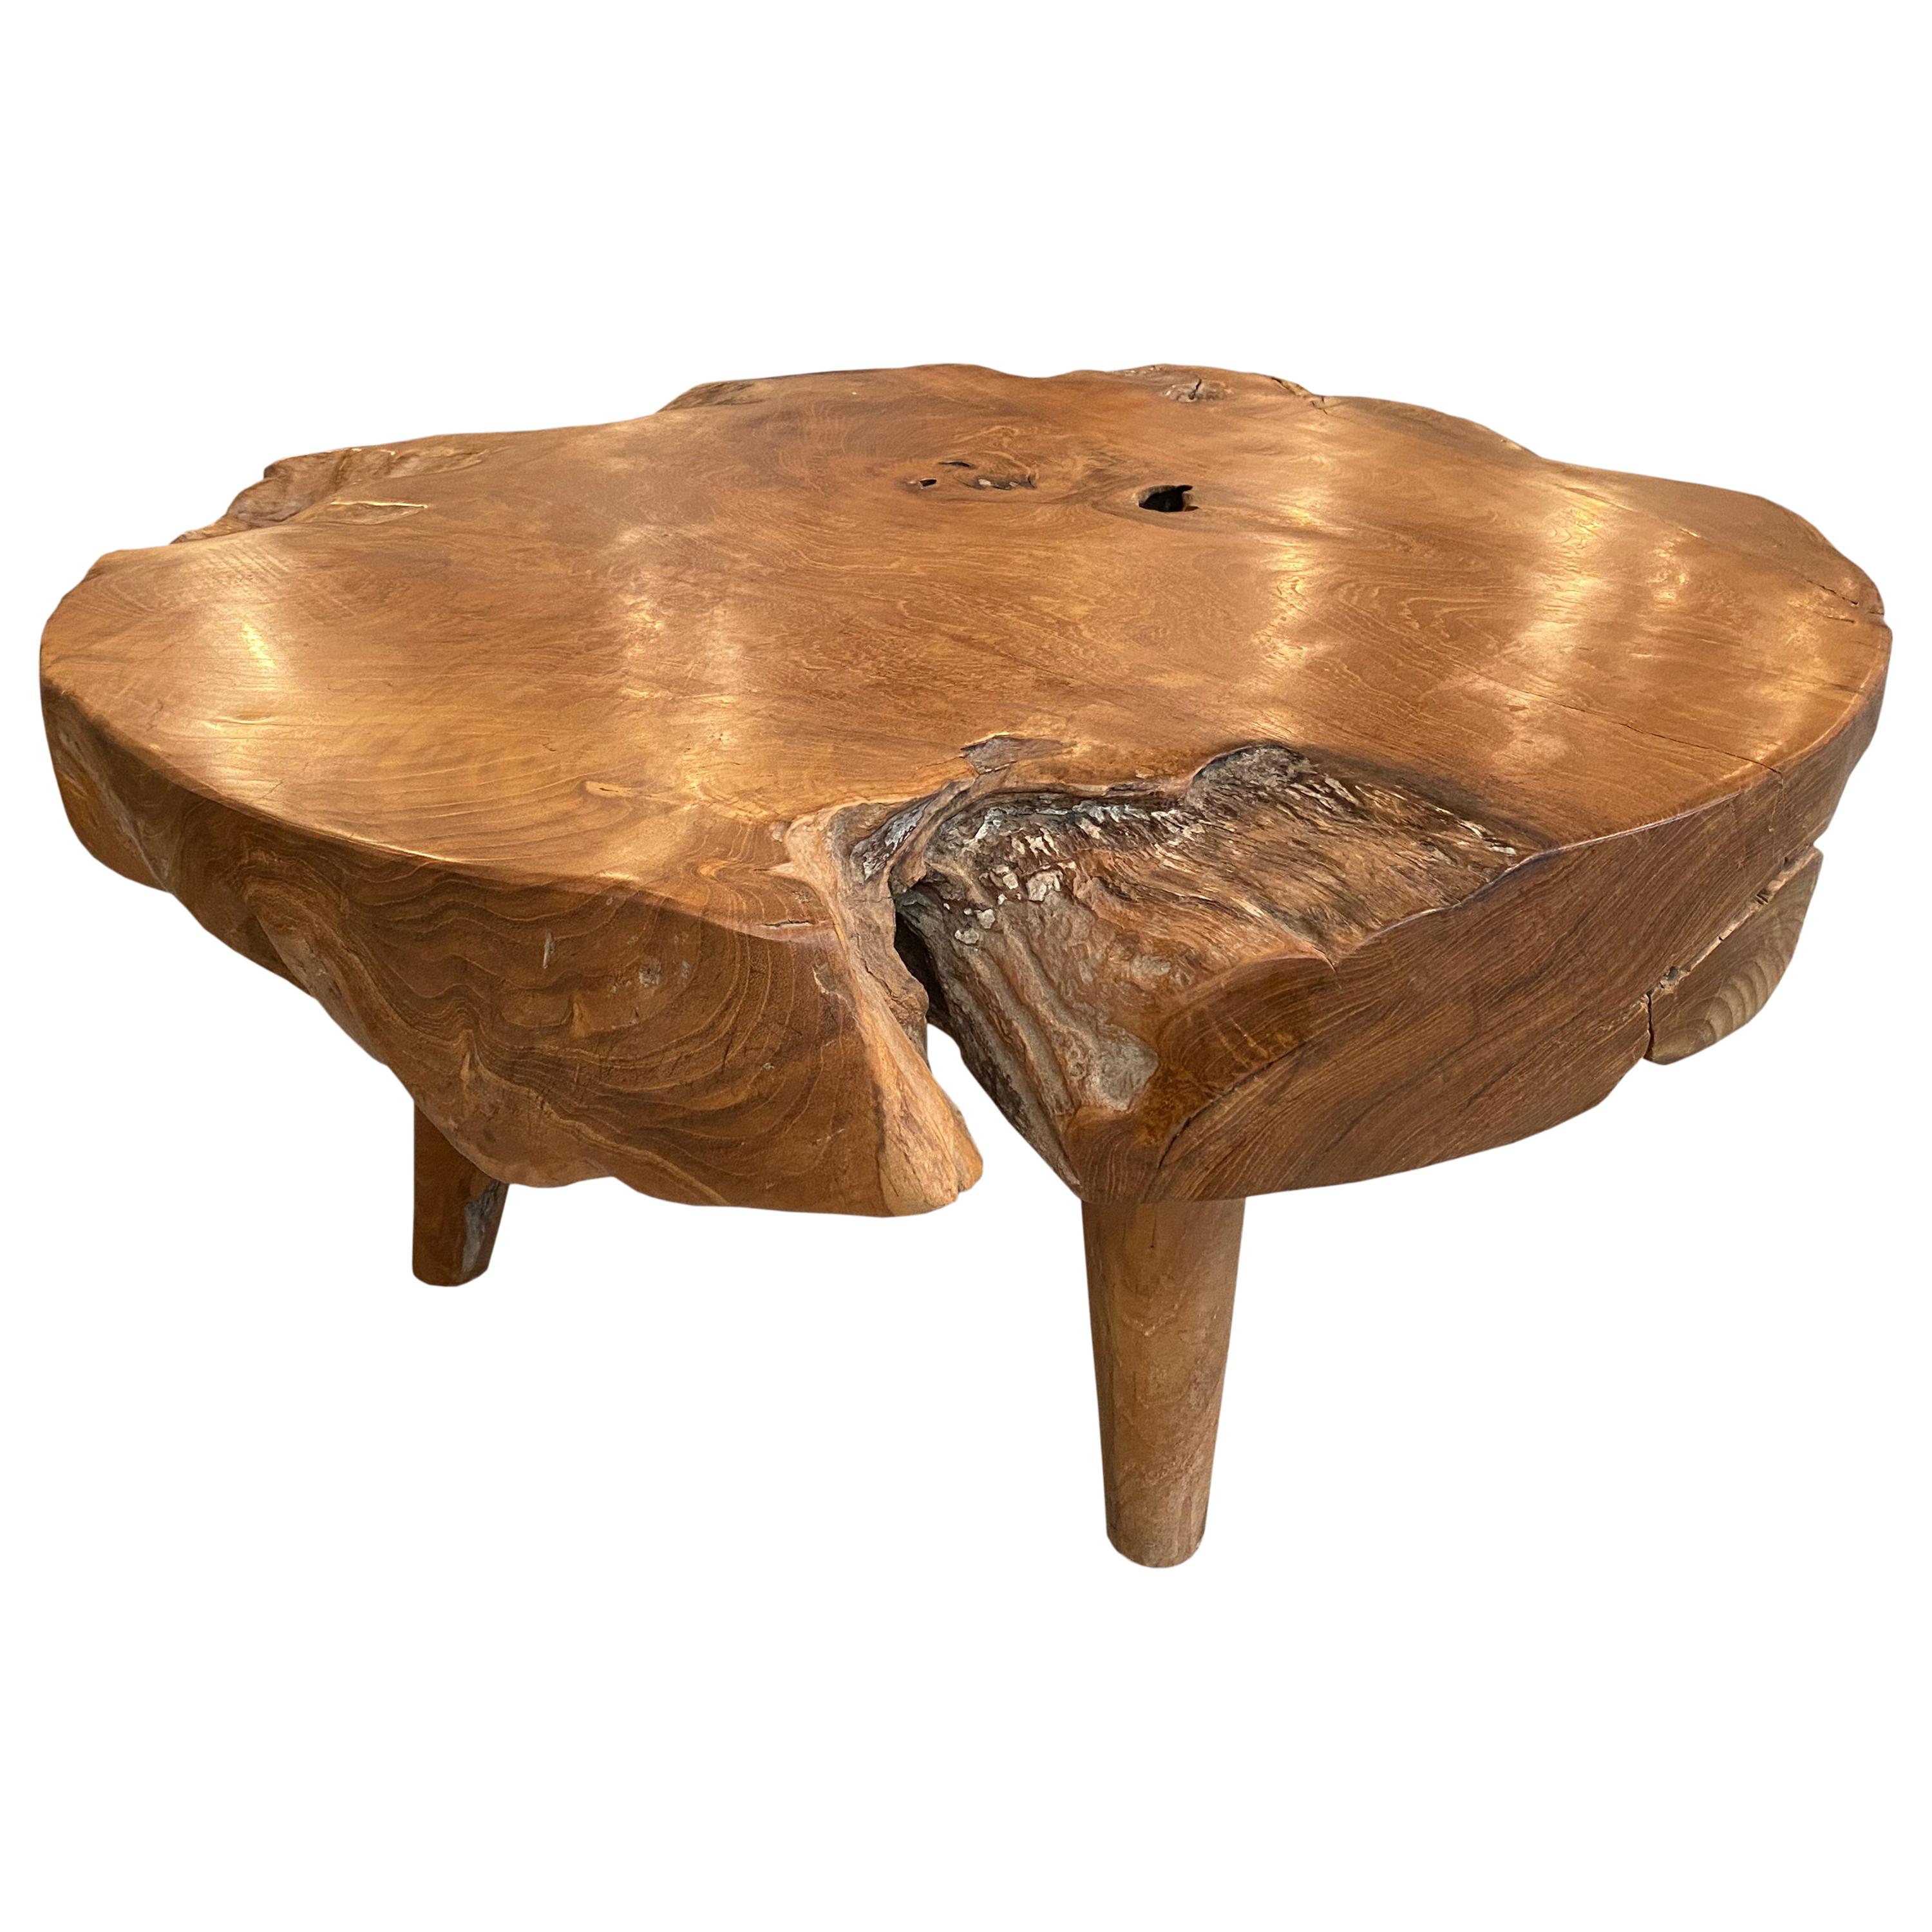 Andrianna Shamaris Organic Round Coffee Table with Midcentury Style Cone Legs